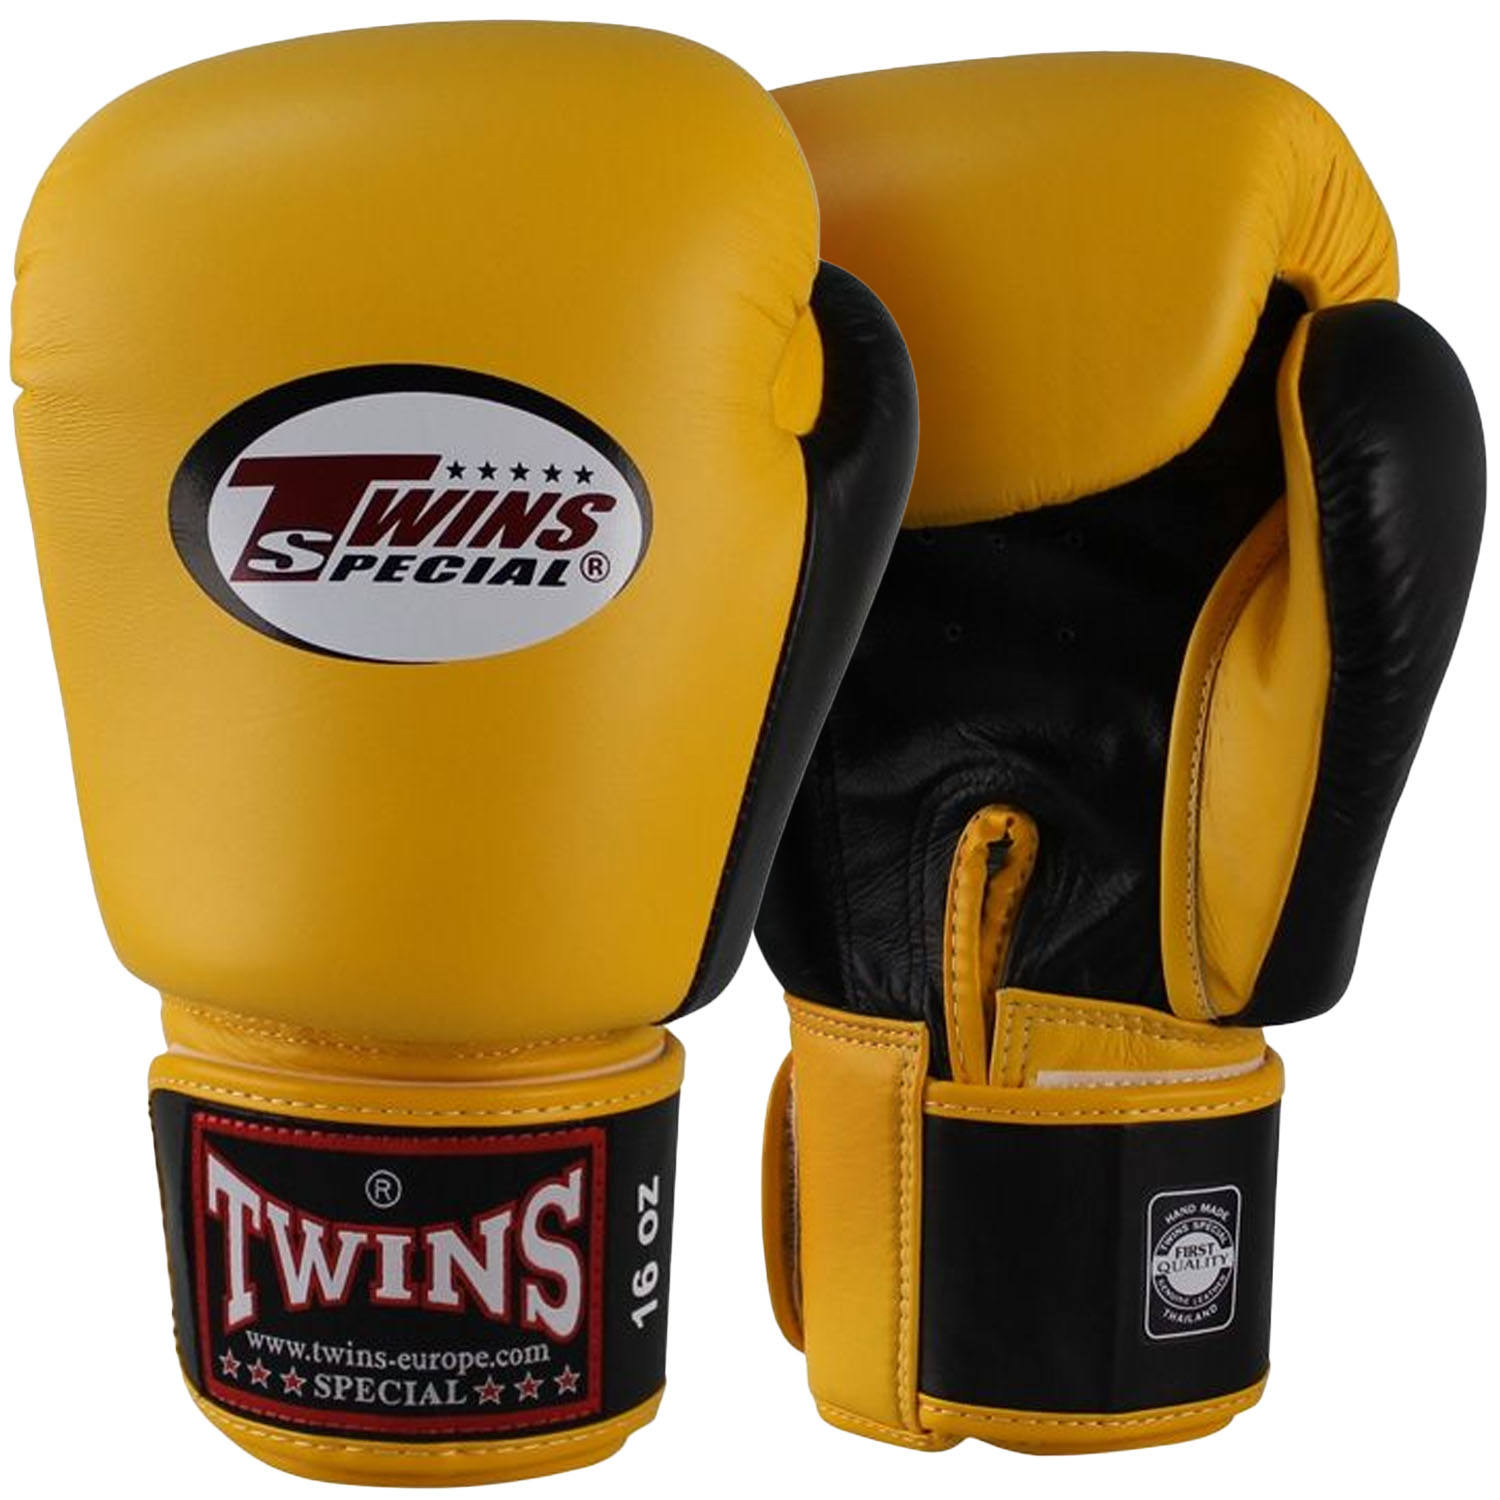 TWINS Special Boxing Gloves, Leather, BGVL-3, yellow-black 14 Oz